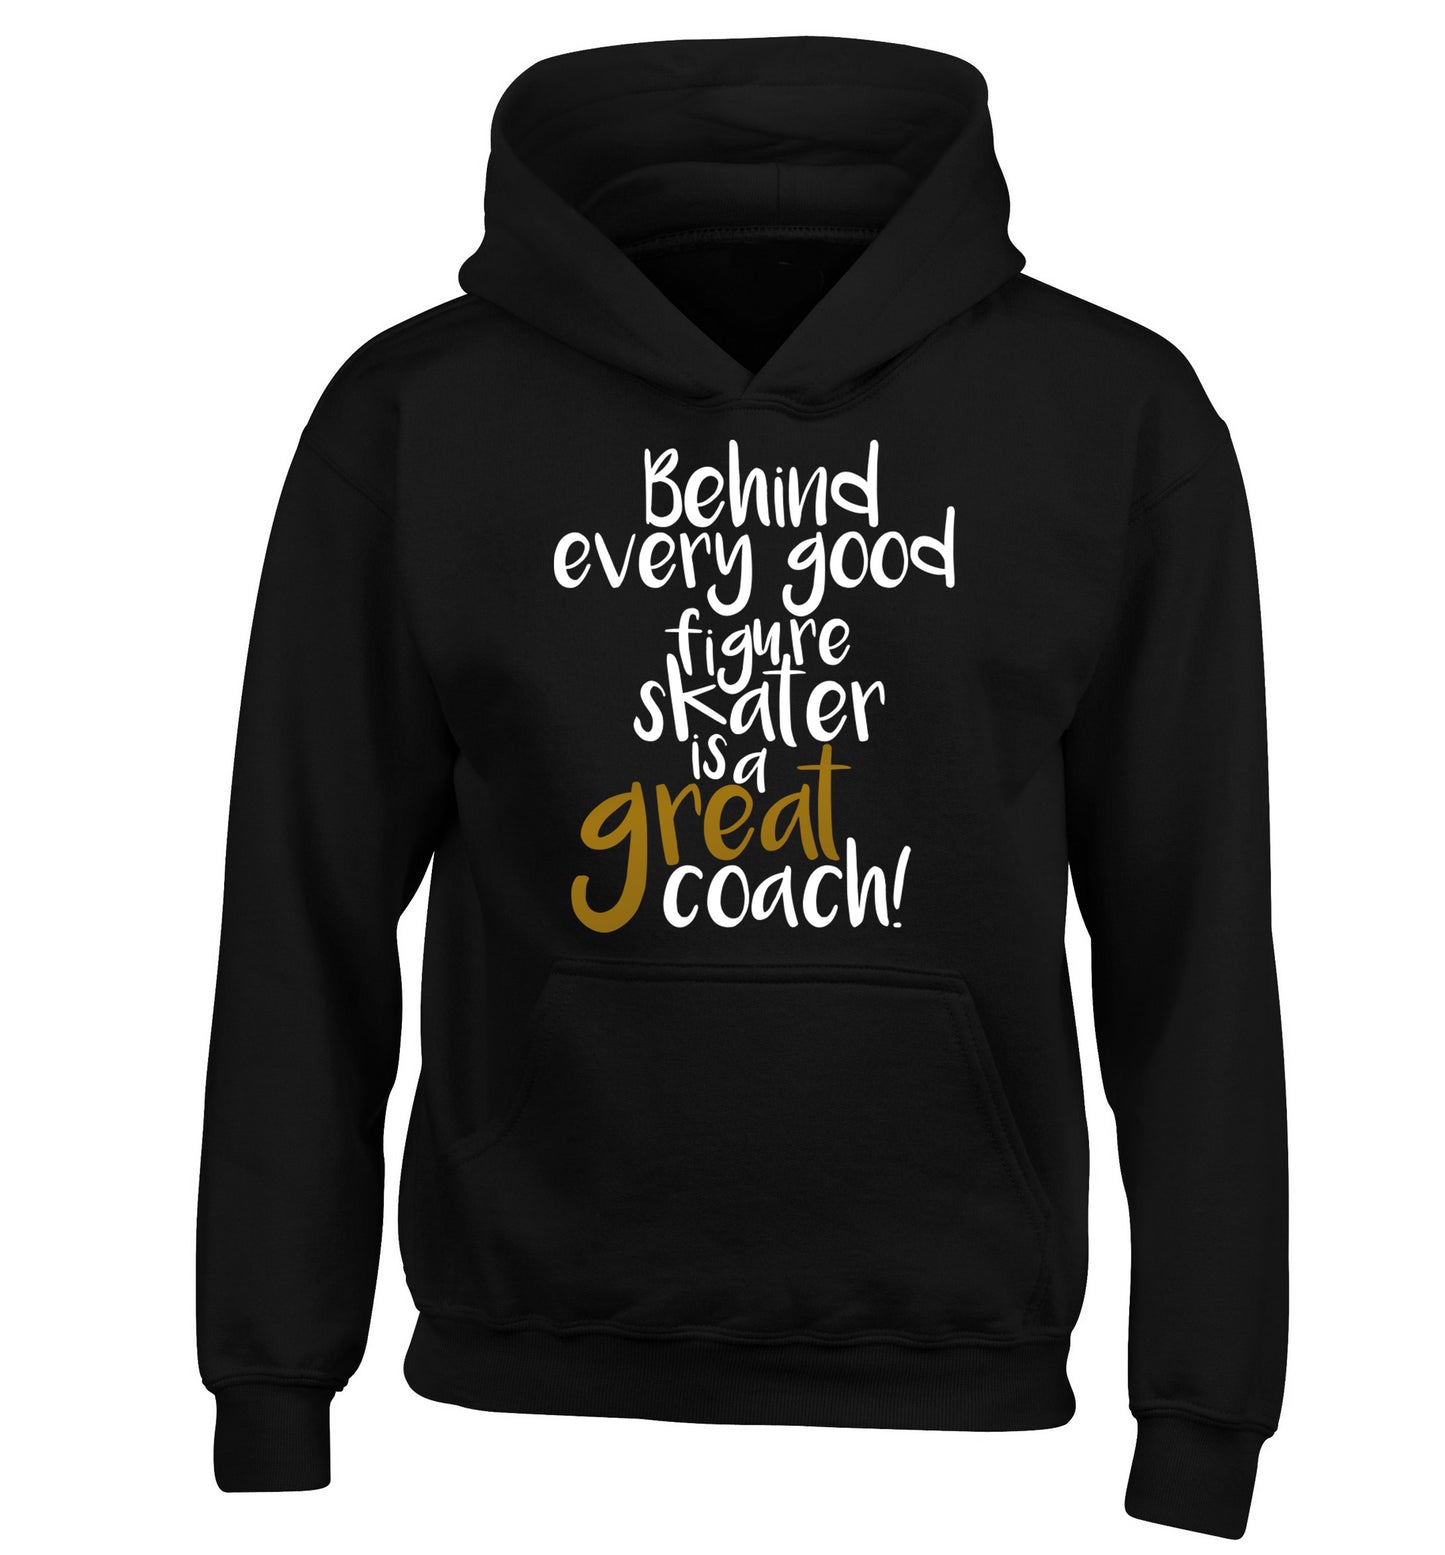 Behind every good figure skater is a great coach children's black hoodie 12-14 Years